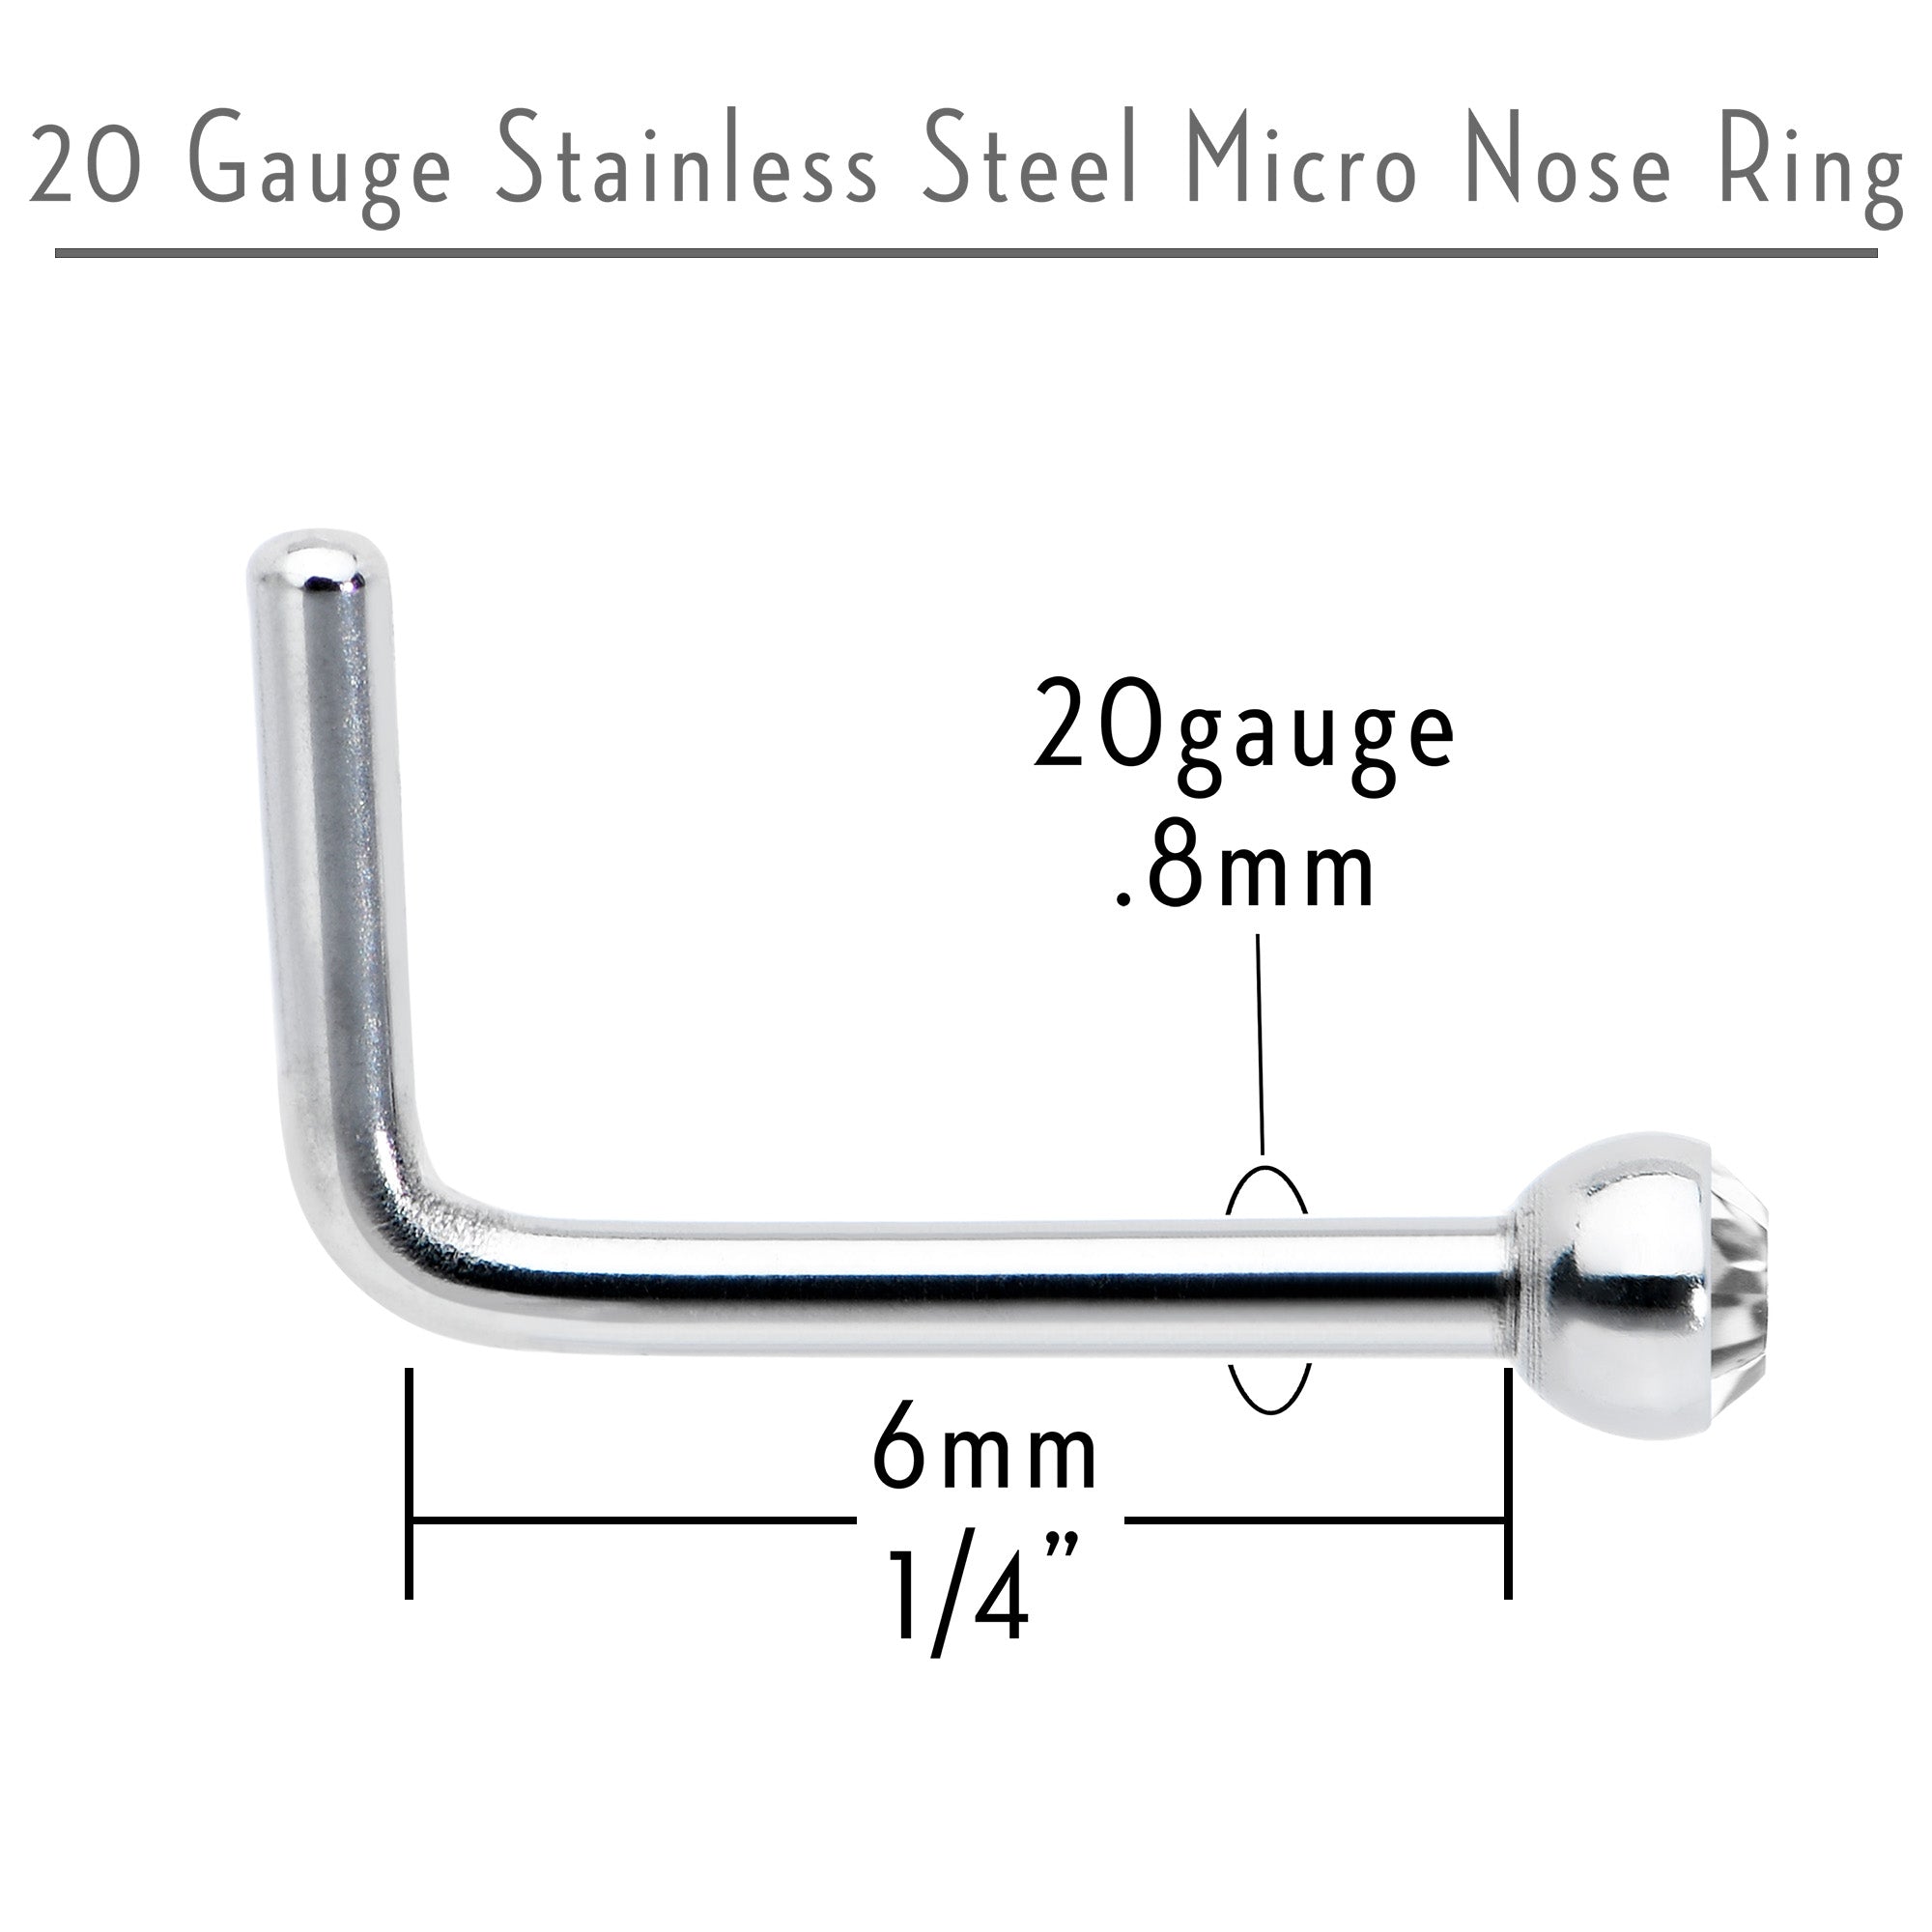 20 Gauge Stainless Steel Clear Gem Micro Nose Ring L-Shaped